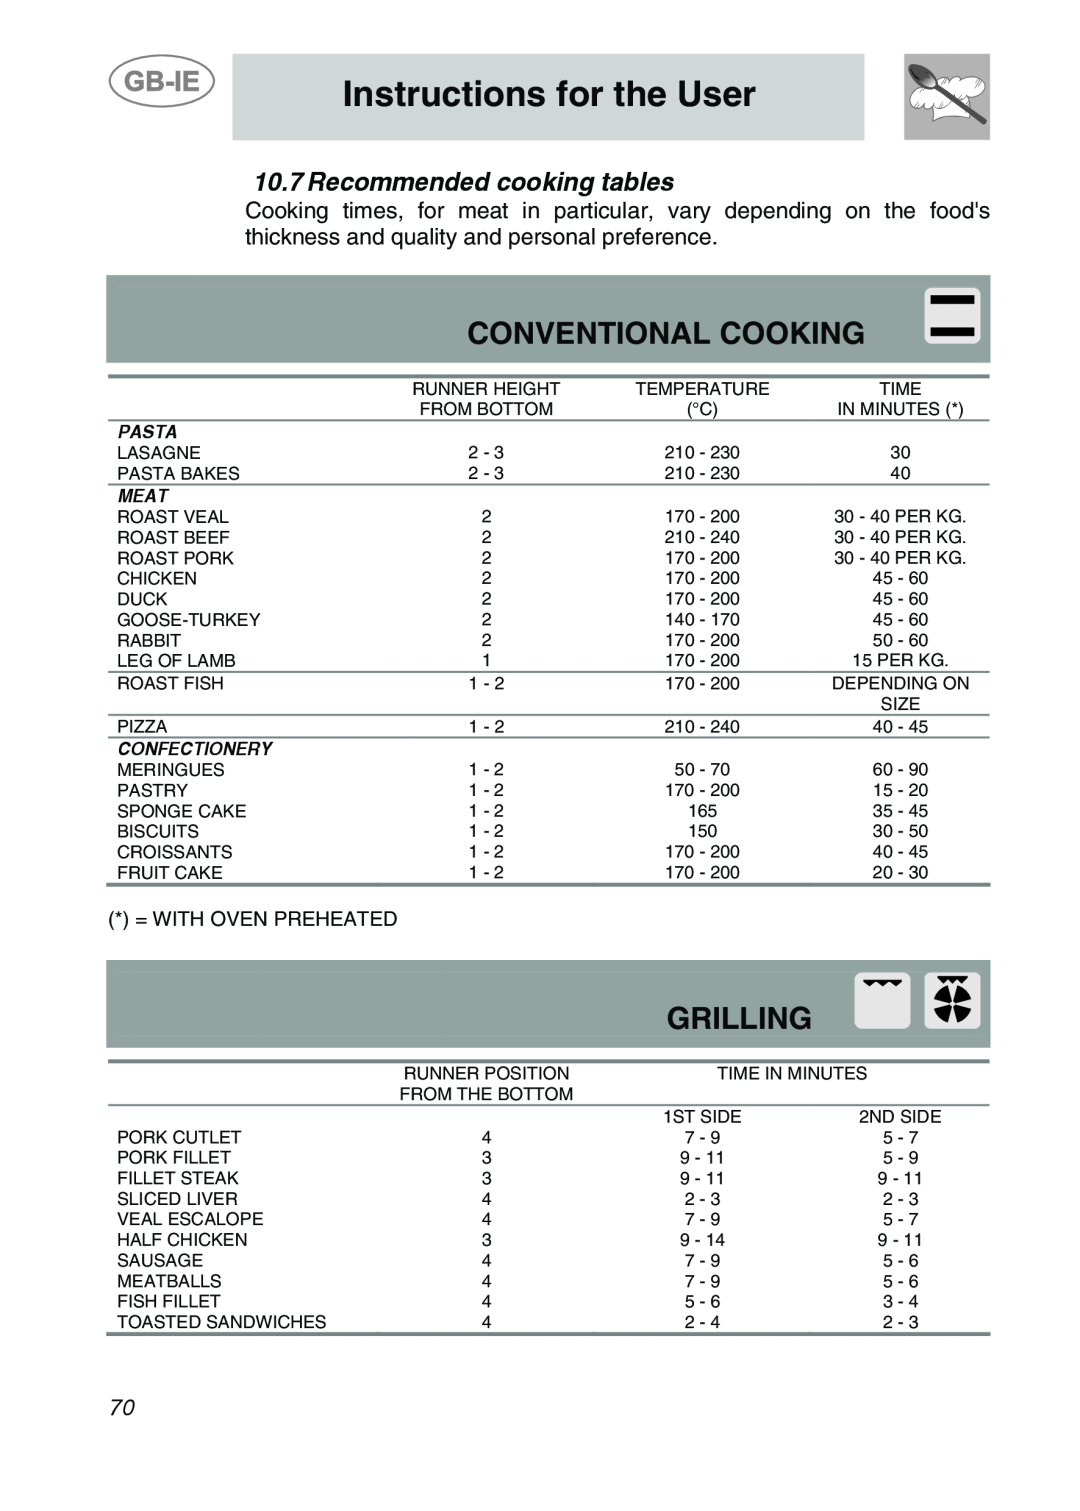 Smeg CS122-6 Conventional Cooking, Grilling, Recommended cooking tables, Instructions for the User, = With Oven Preheated 